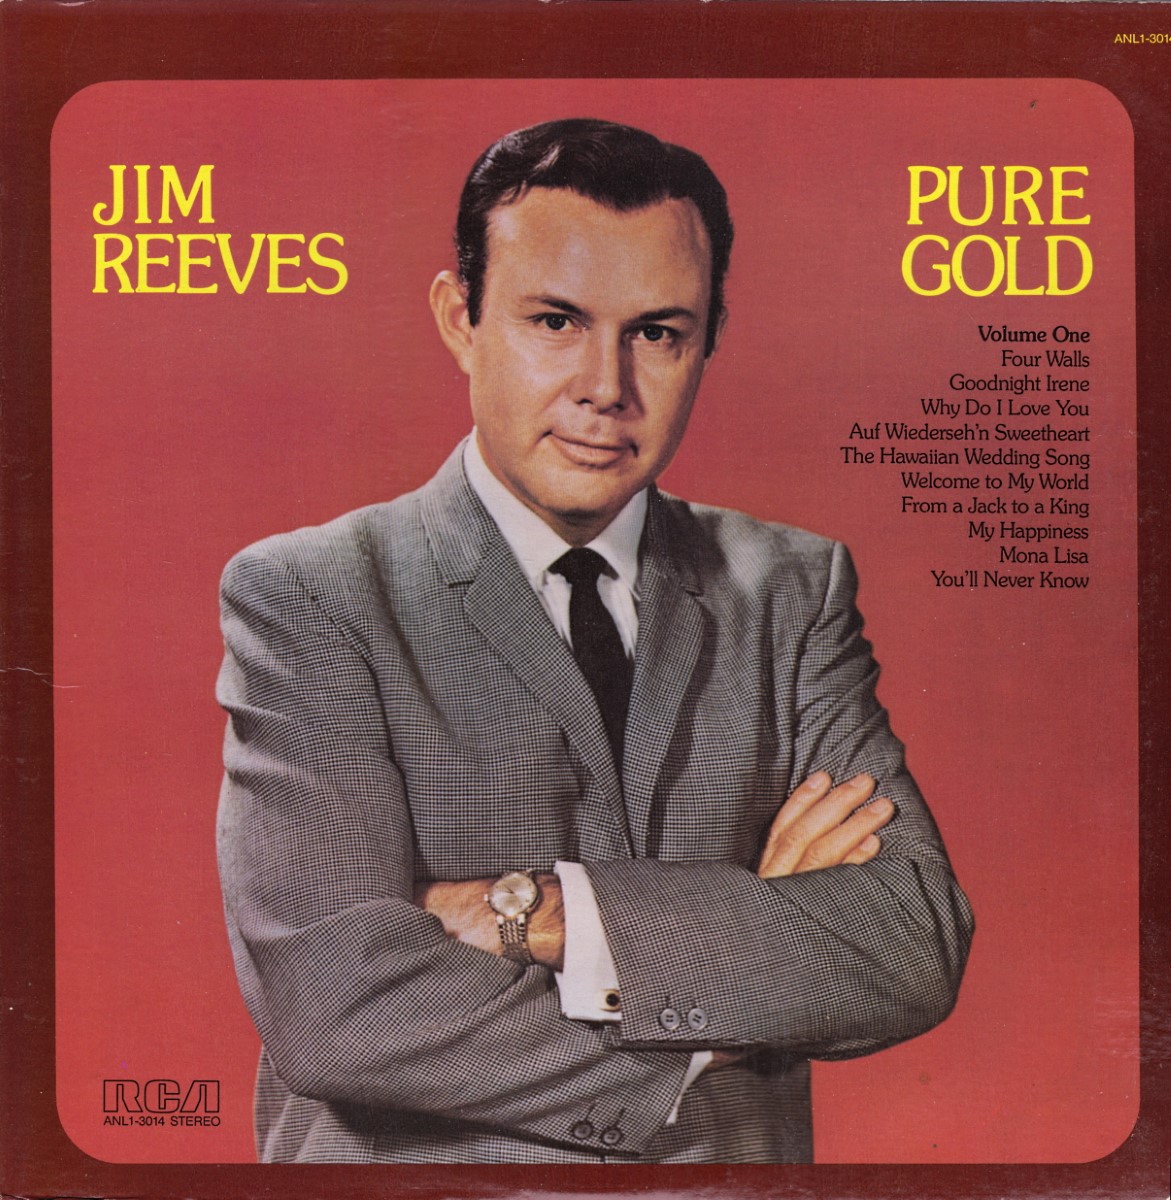 Jim Reeves - Pure Gold Volume 1 (1978)